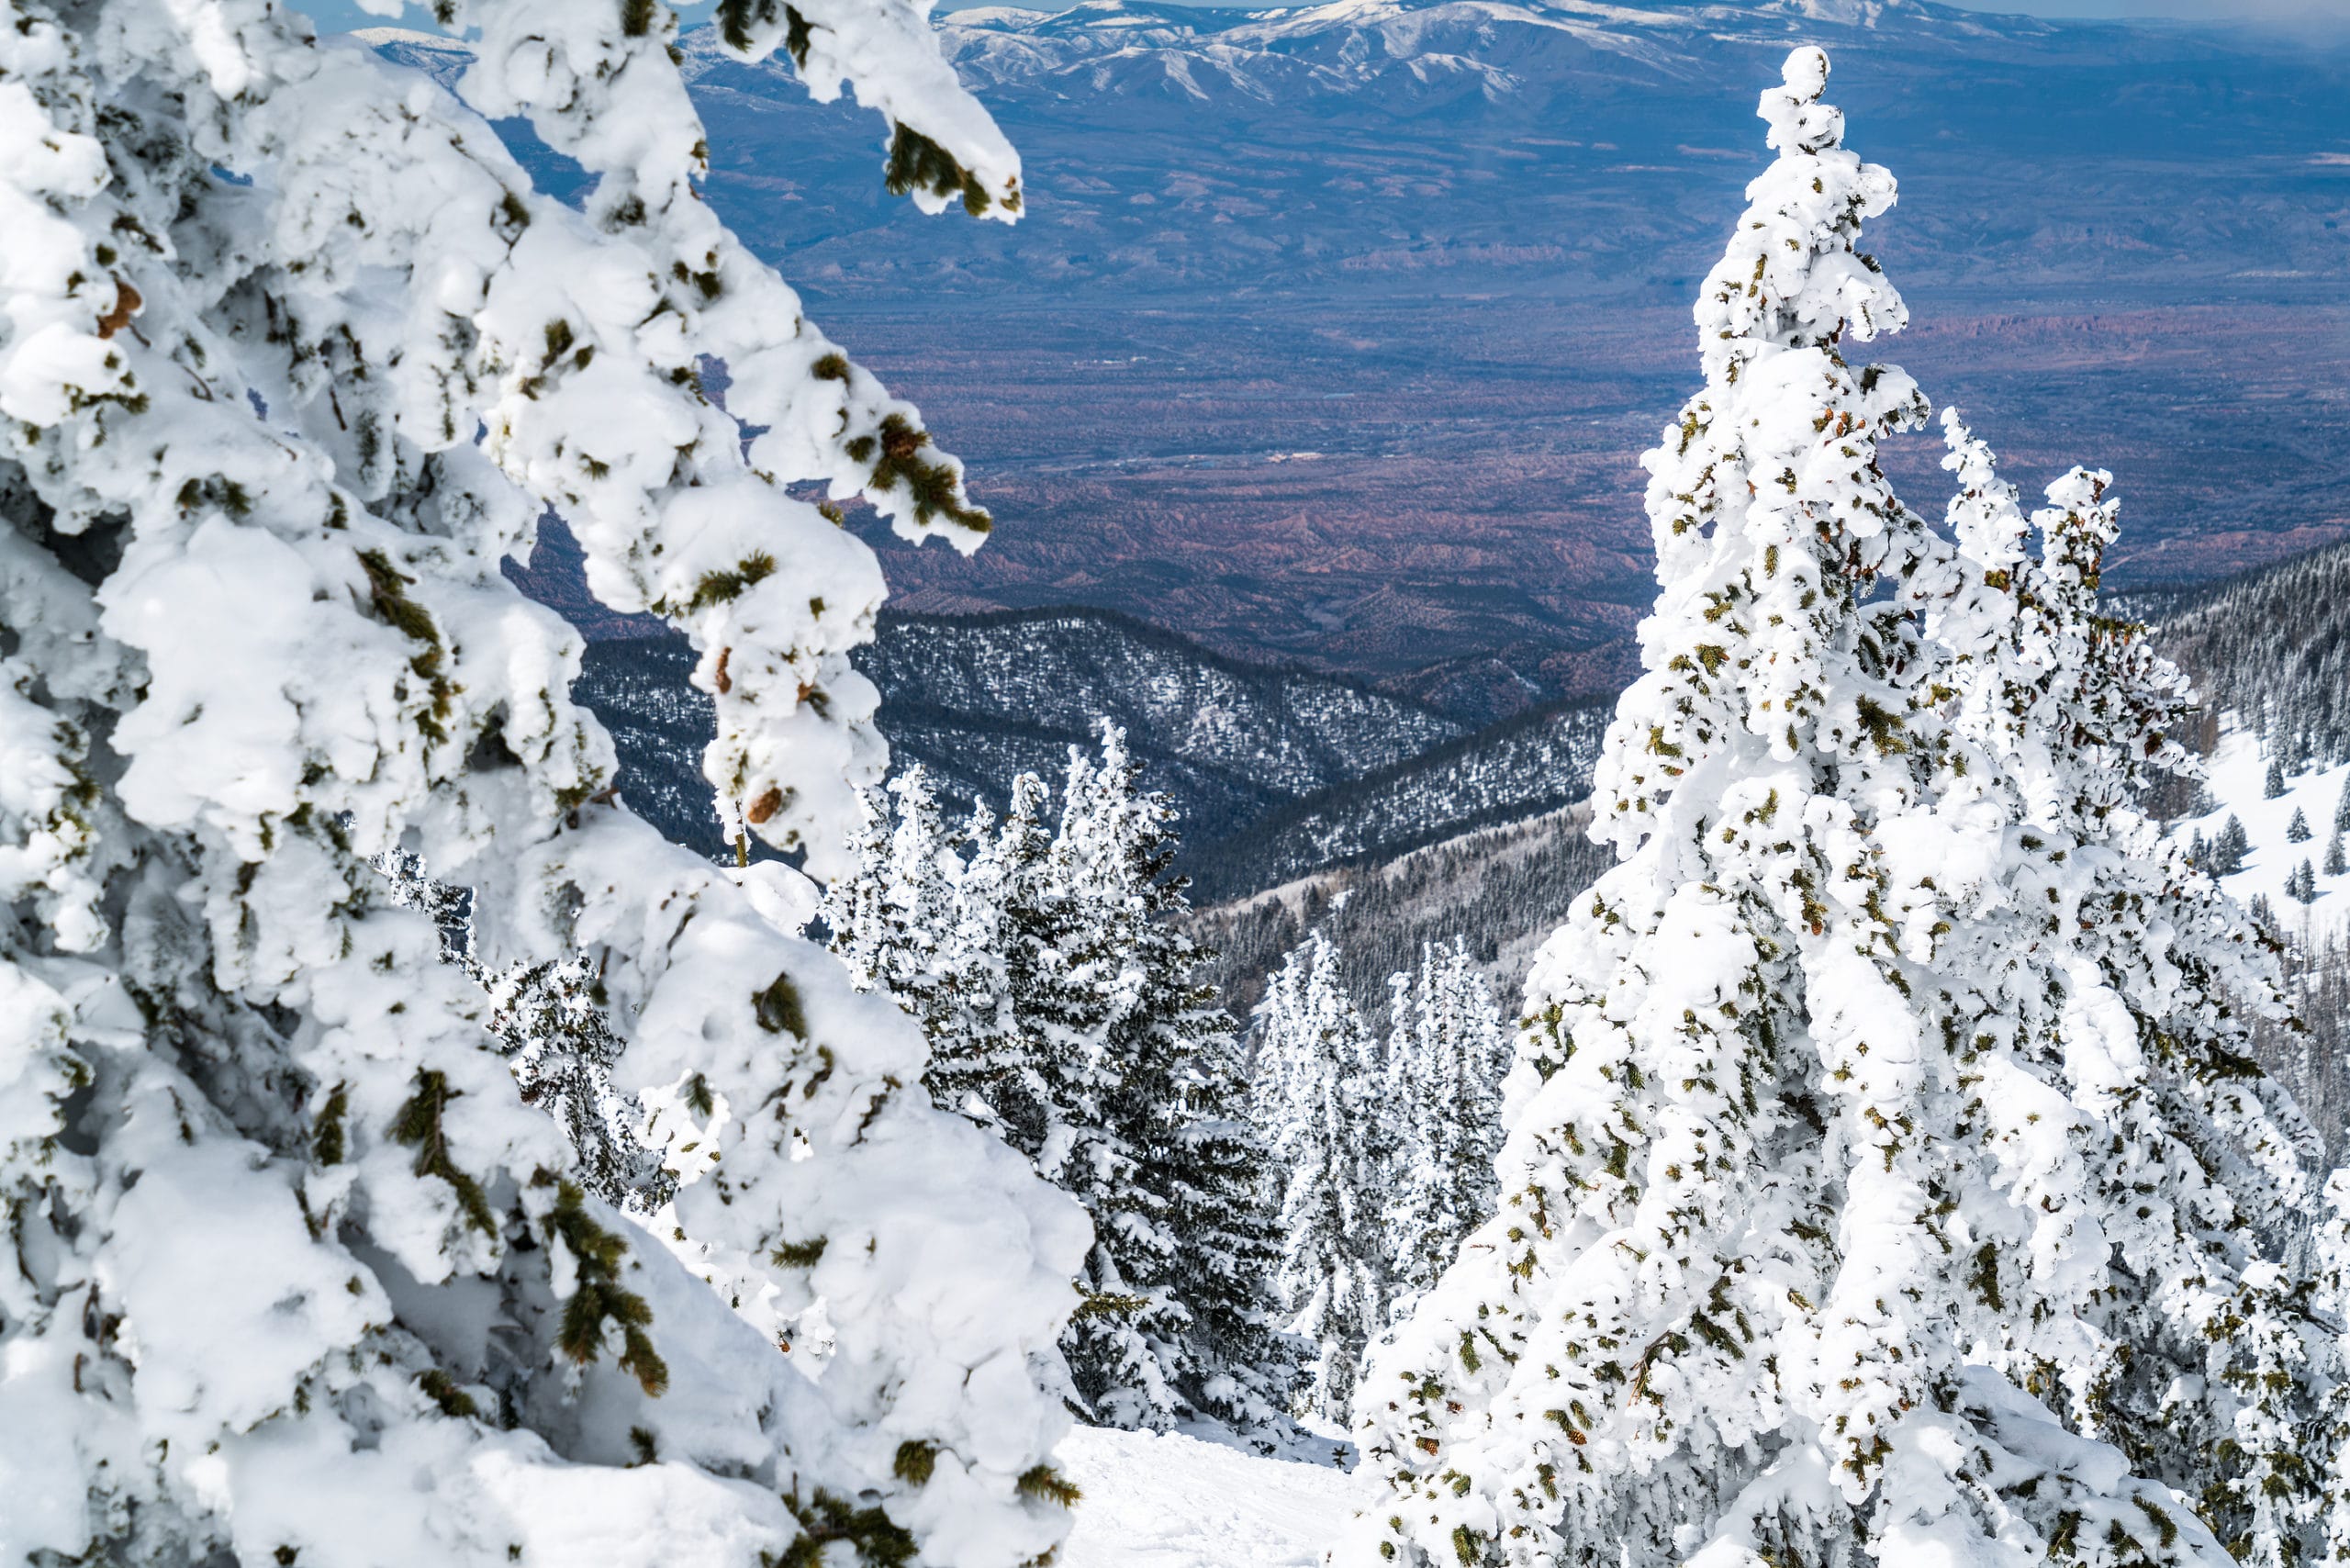 Enjoy beautiful scenery and fun things to do in Santa Fe This Winter